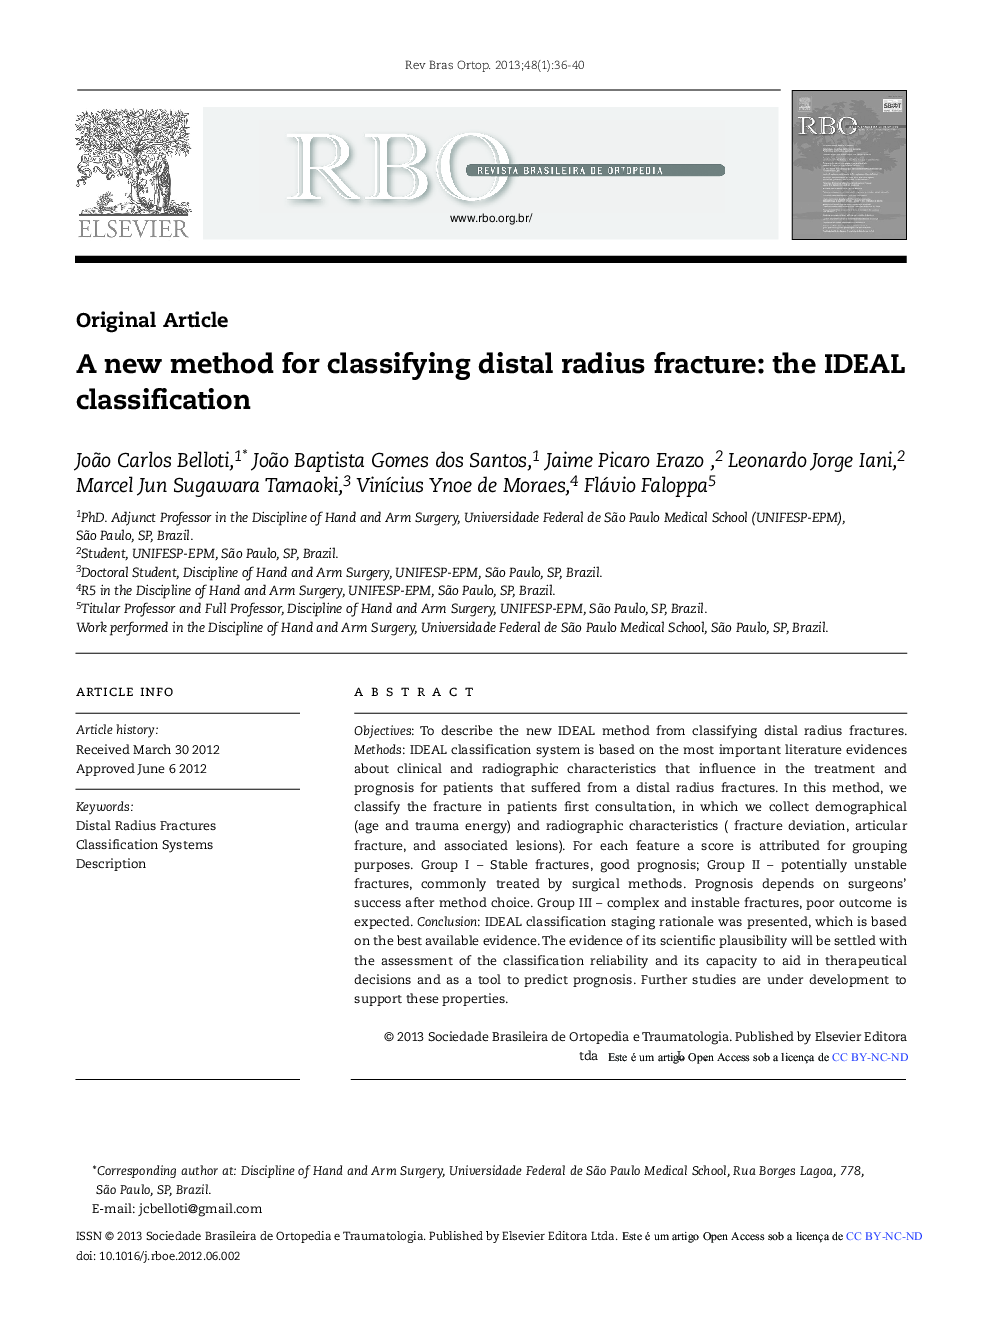 A new method for classifying distal radius fracture: the IDEAL classification *